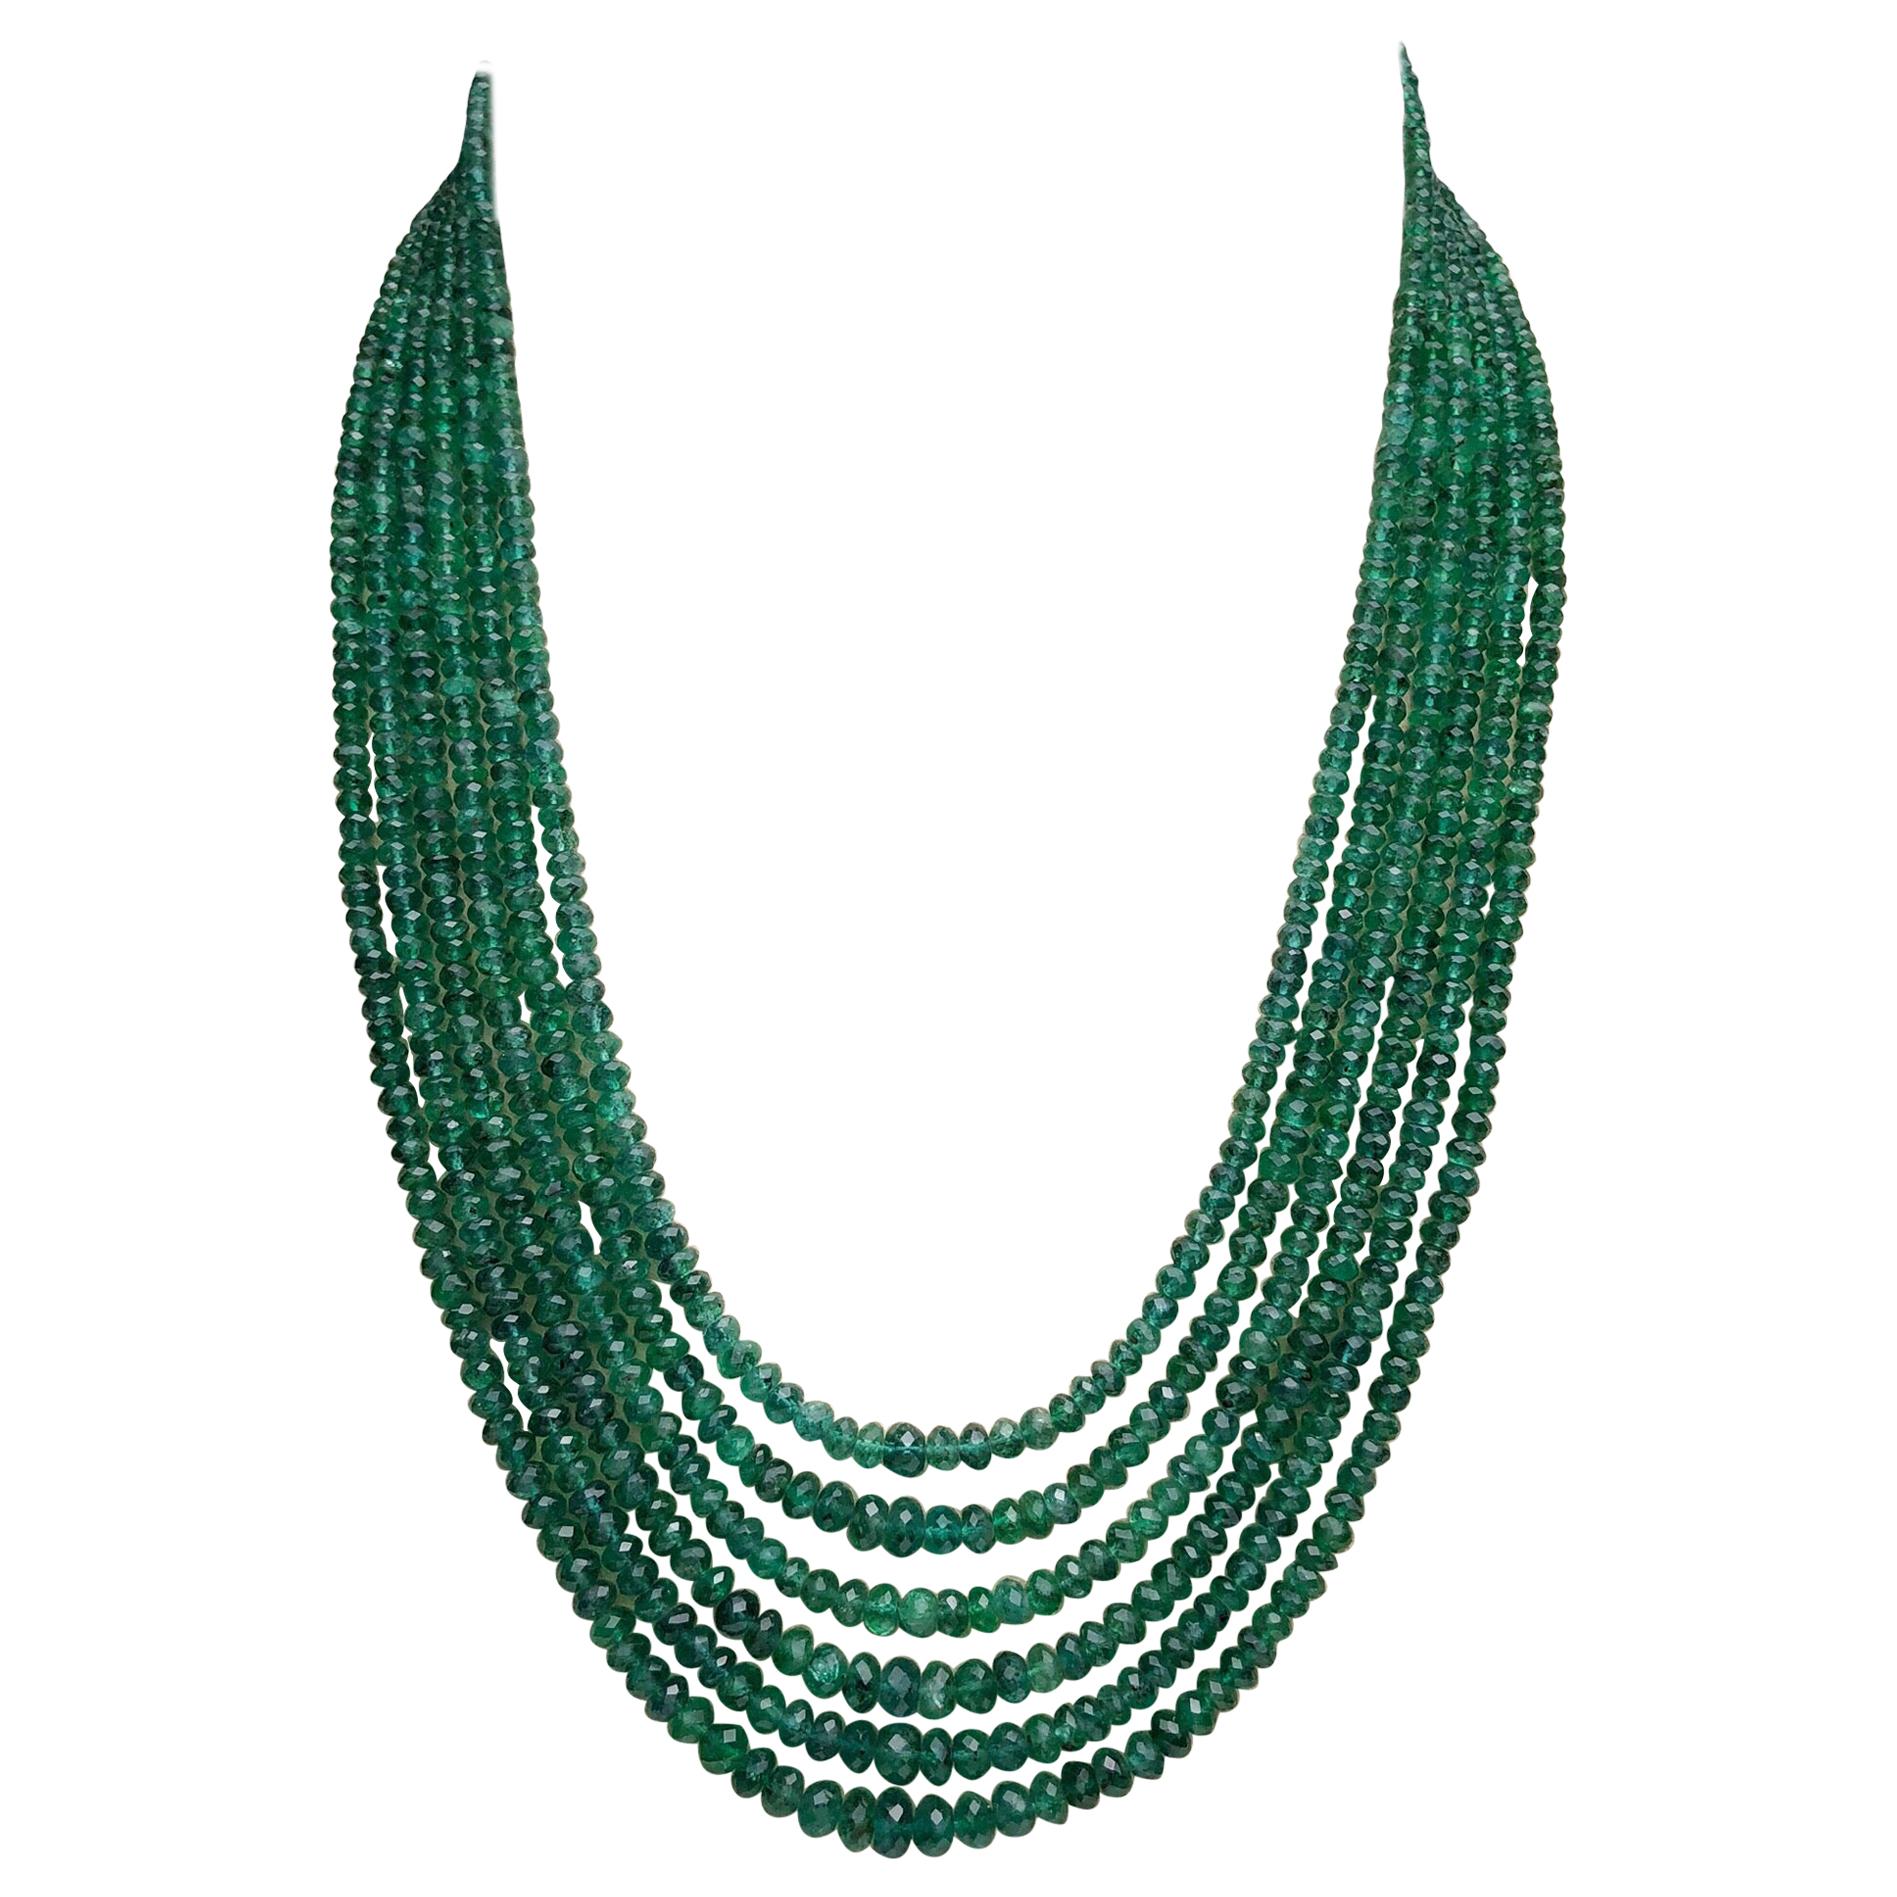 Natural Faceted 302 Carat Emerald Bead 6-Strand Necklace with Diamond Clasp